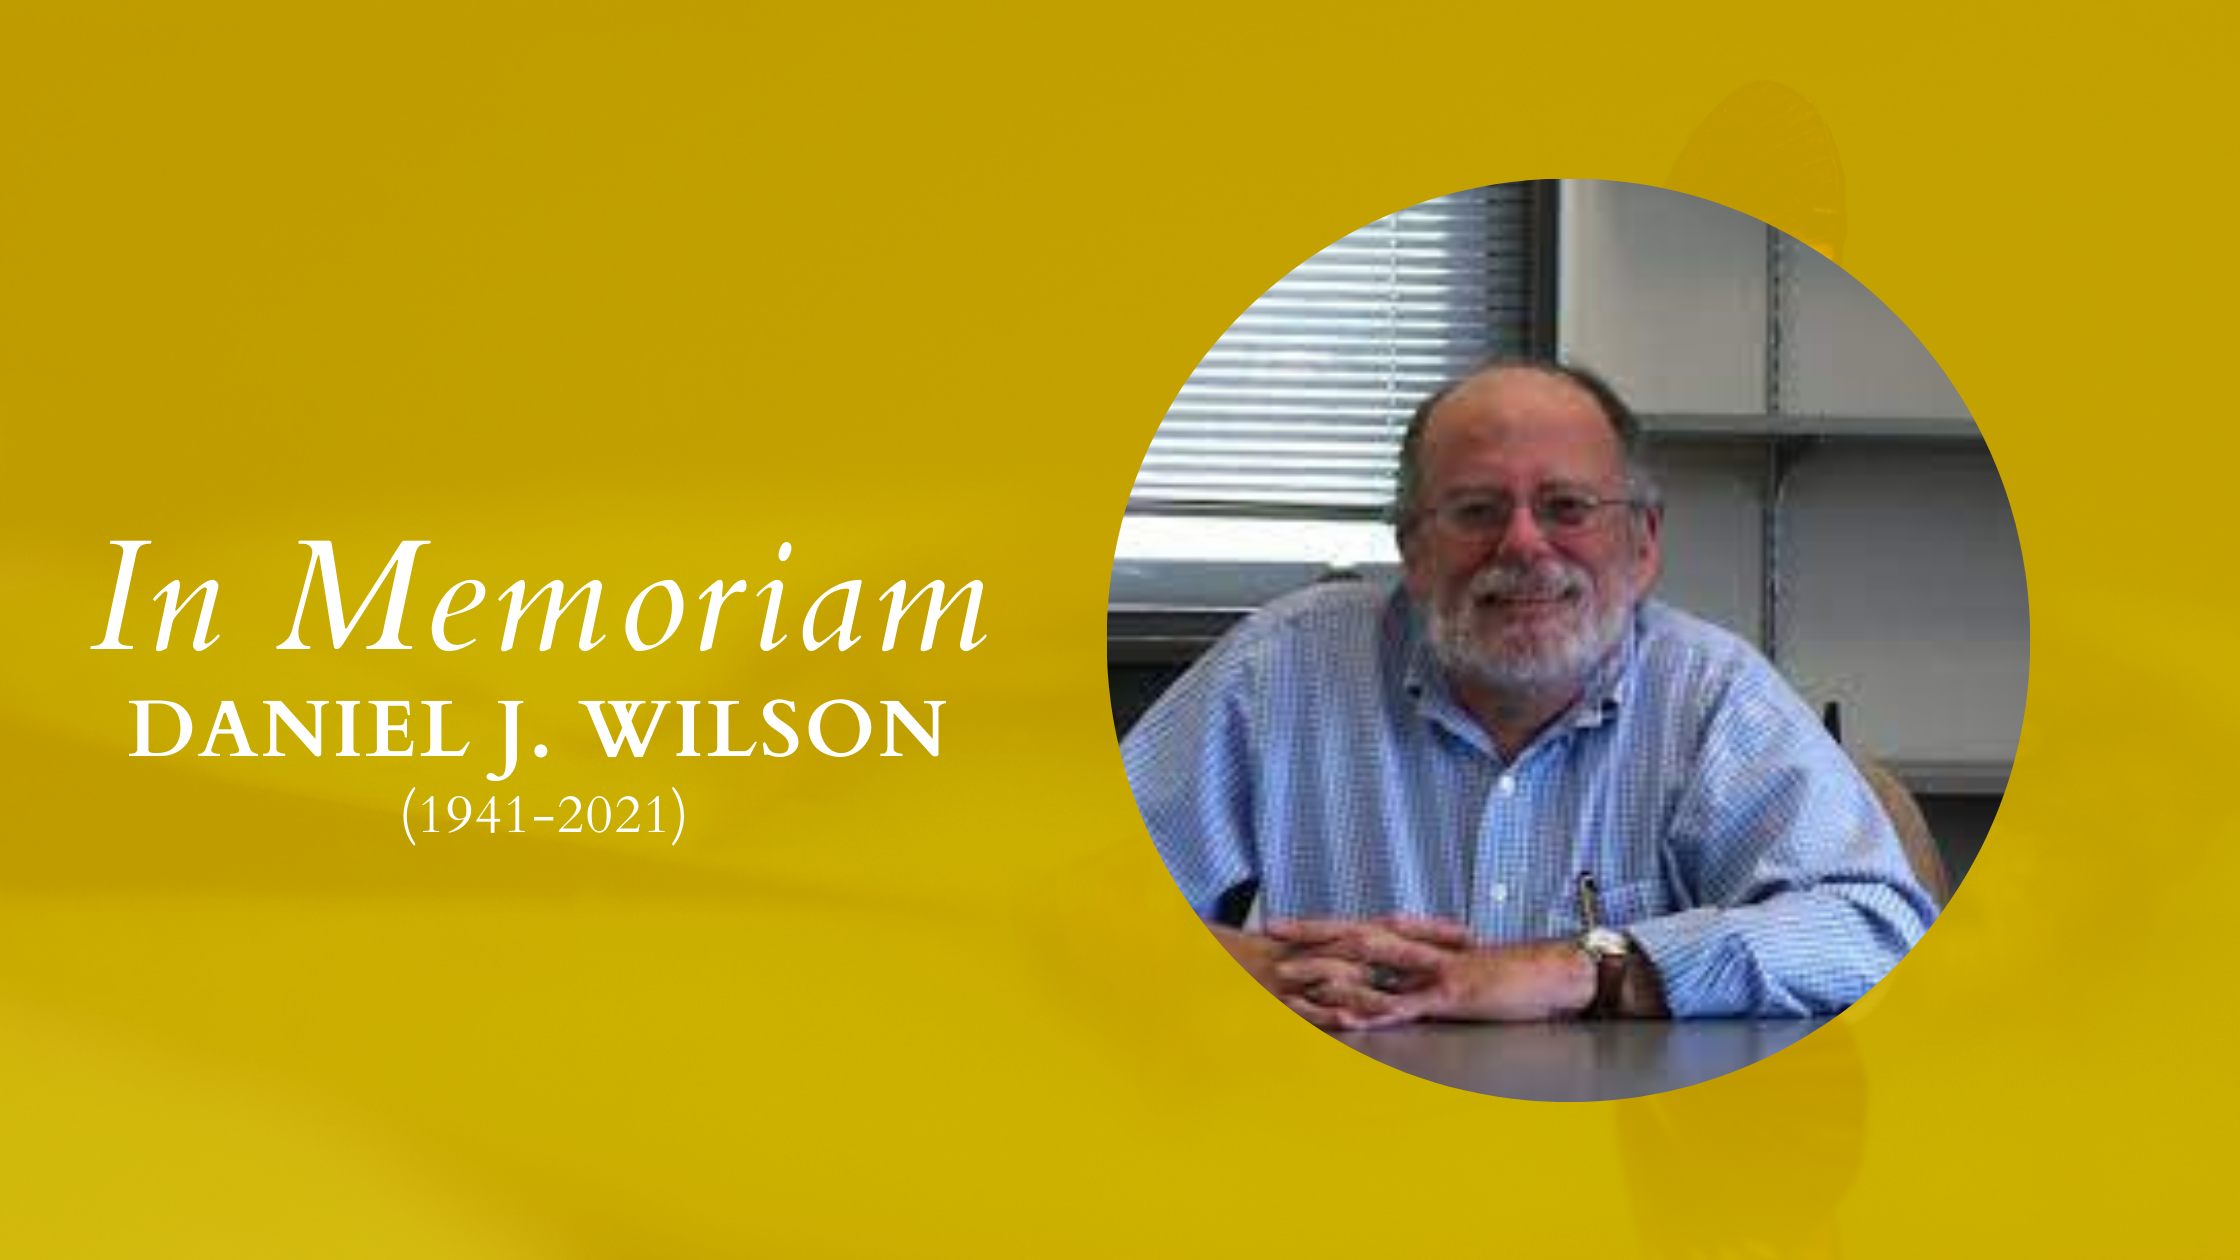 A header banner with yellow graphic on the left, upon which white text is placed: "In Memoriam Daniel J. Wilson (1941-2021)" On the right is a photograph of Dan, a bespectacled white man with white hair and beard. He is wearing a blue collared shirt, siting at a desk with his hands resting and interlocked, and smiling.